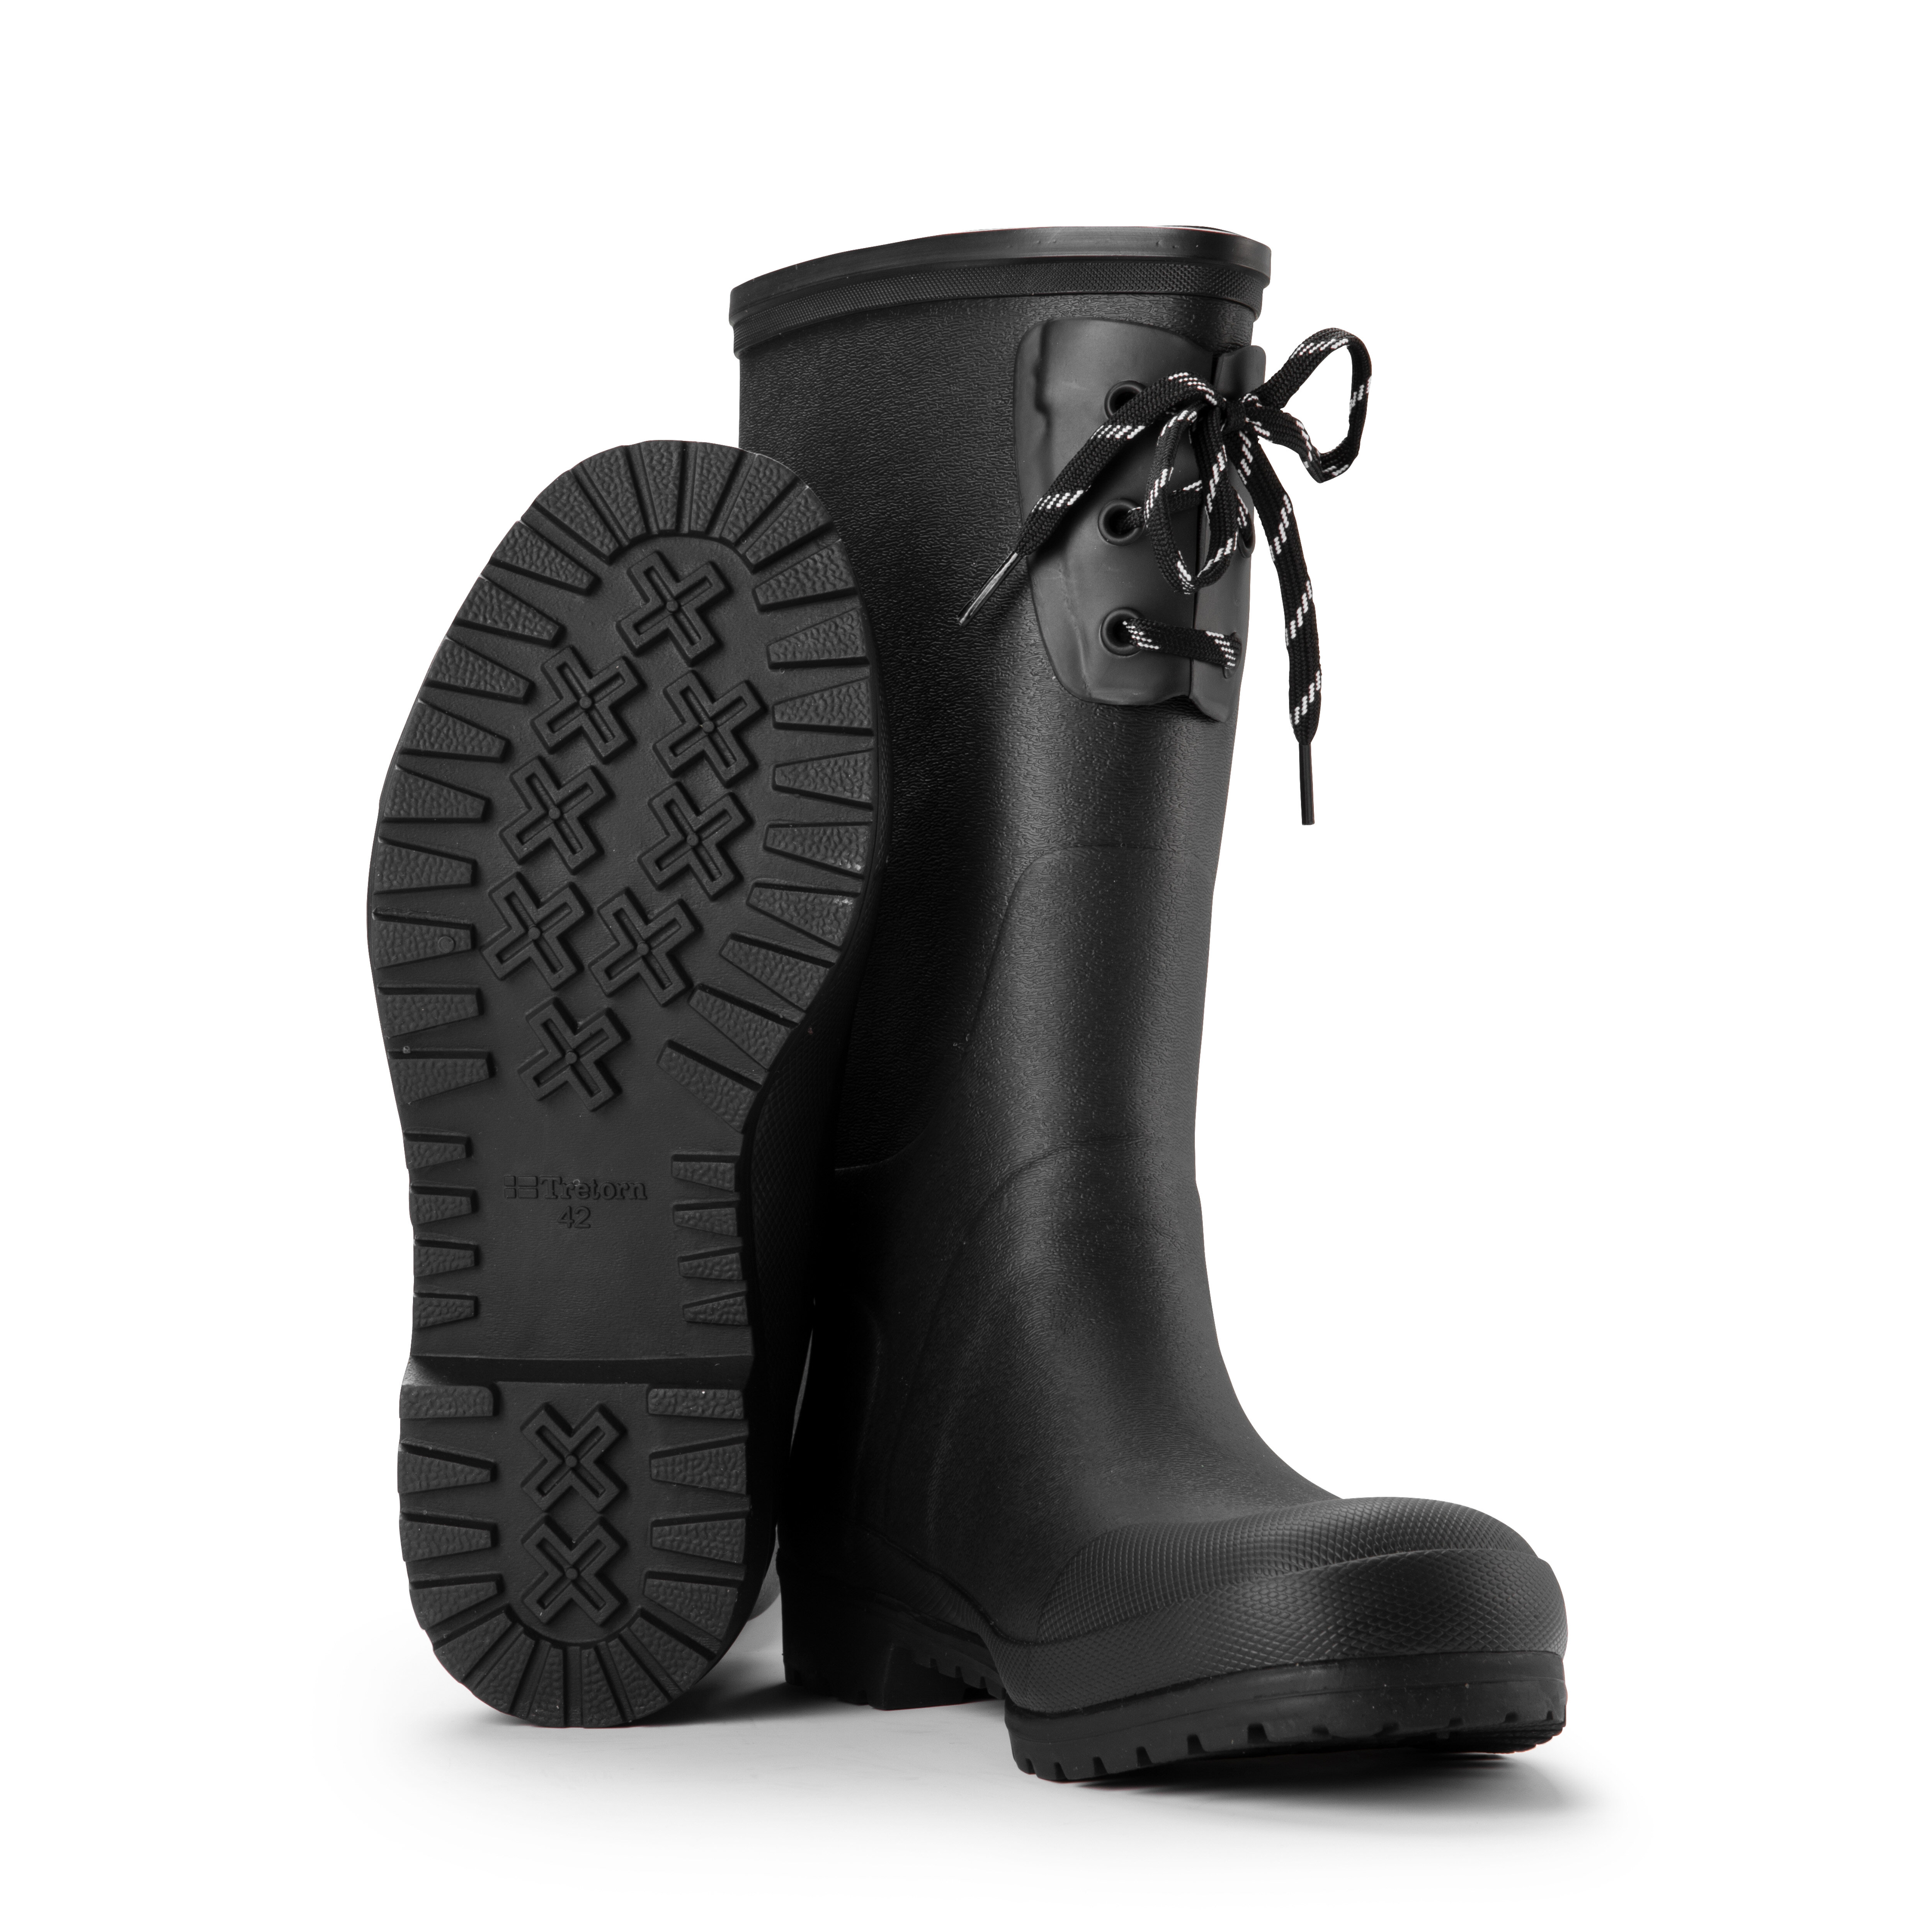 STRONG S RUBBER BOOT